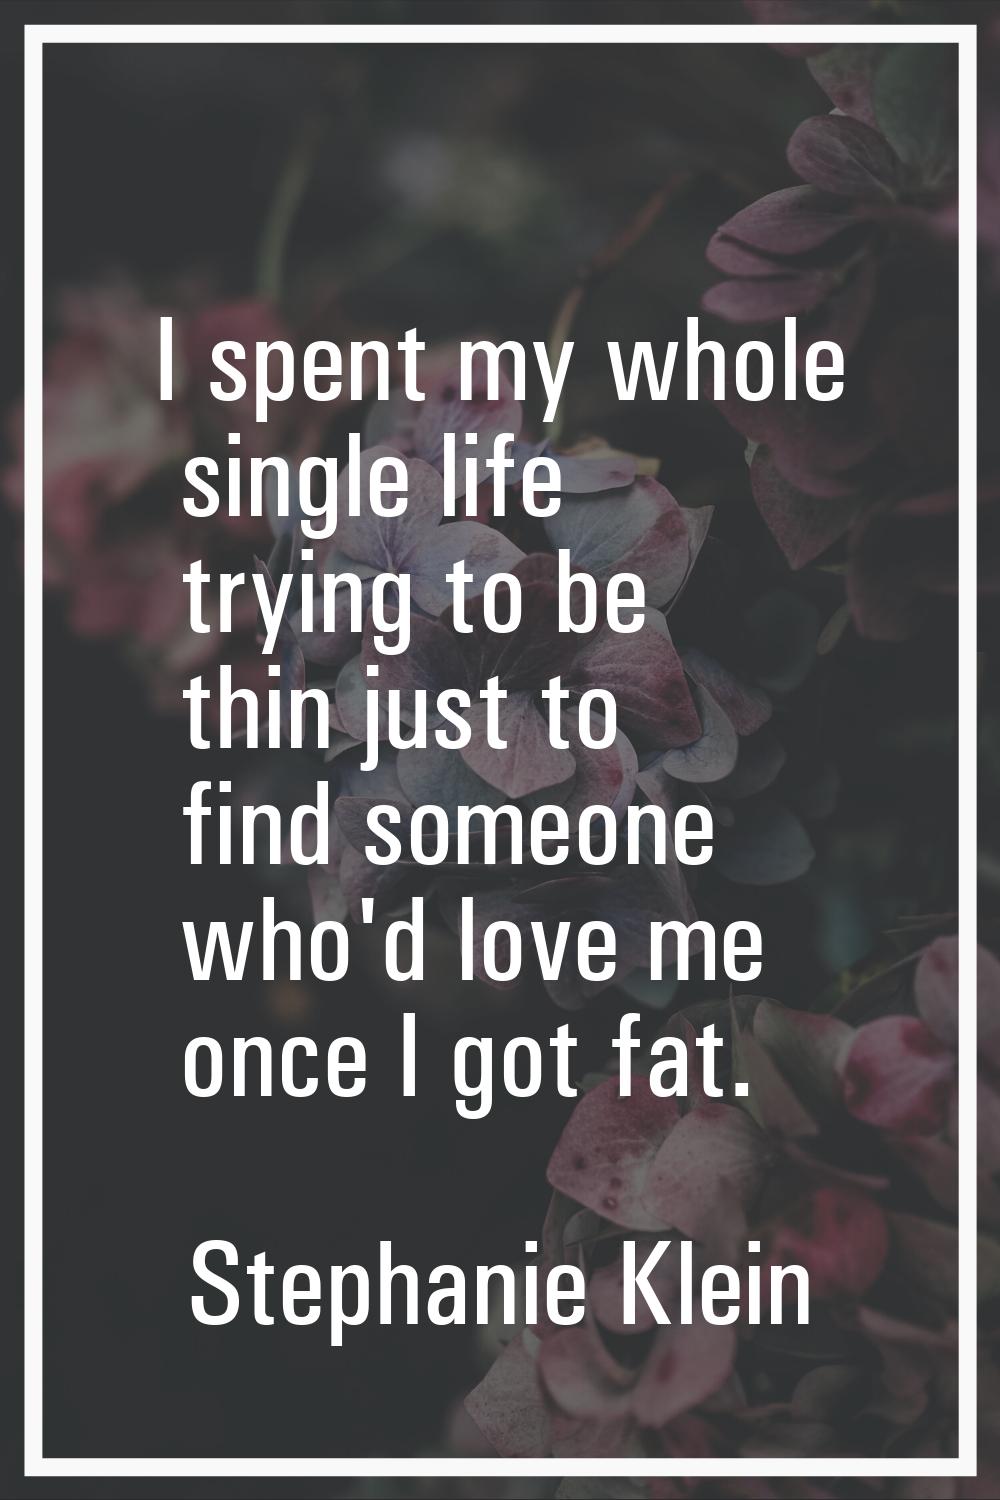 I spent my whole single life trying to be thin just to find someone who'd love me once I got fat.